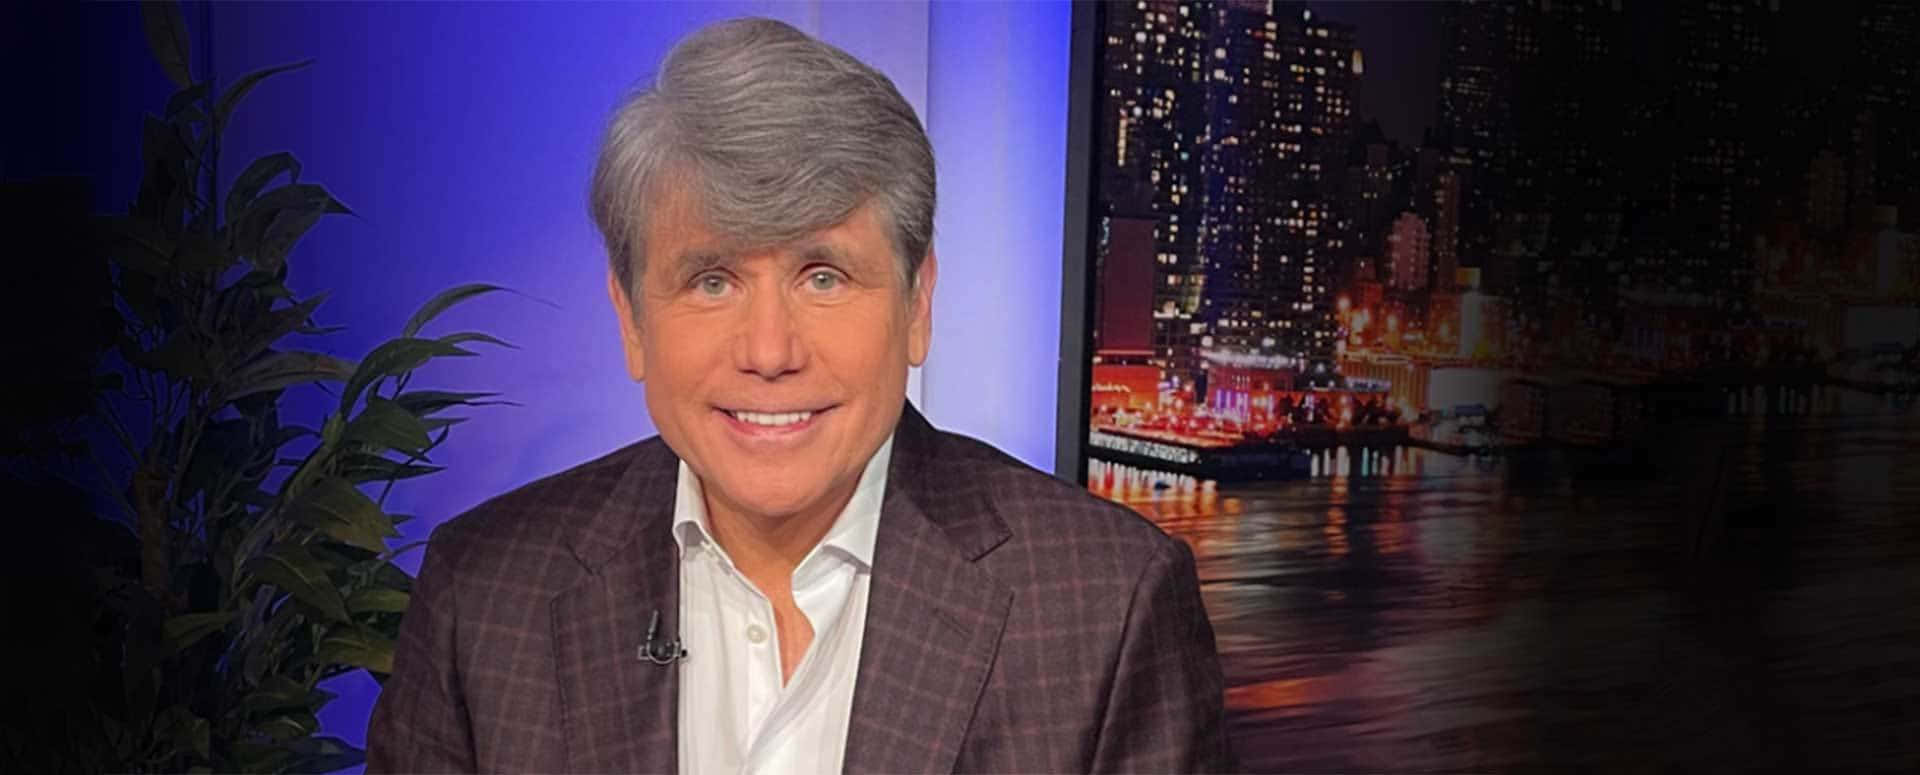 Rod Blagojevich Smiling On Show Wallpaper